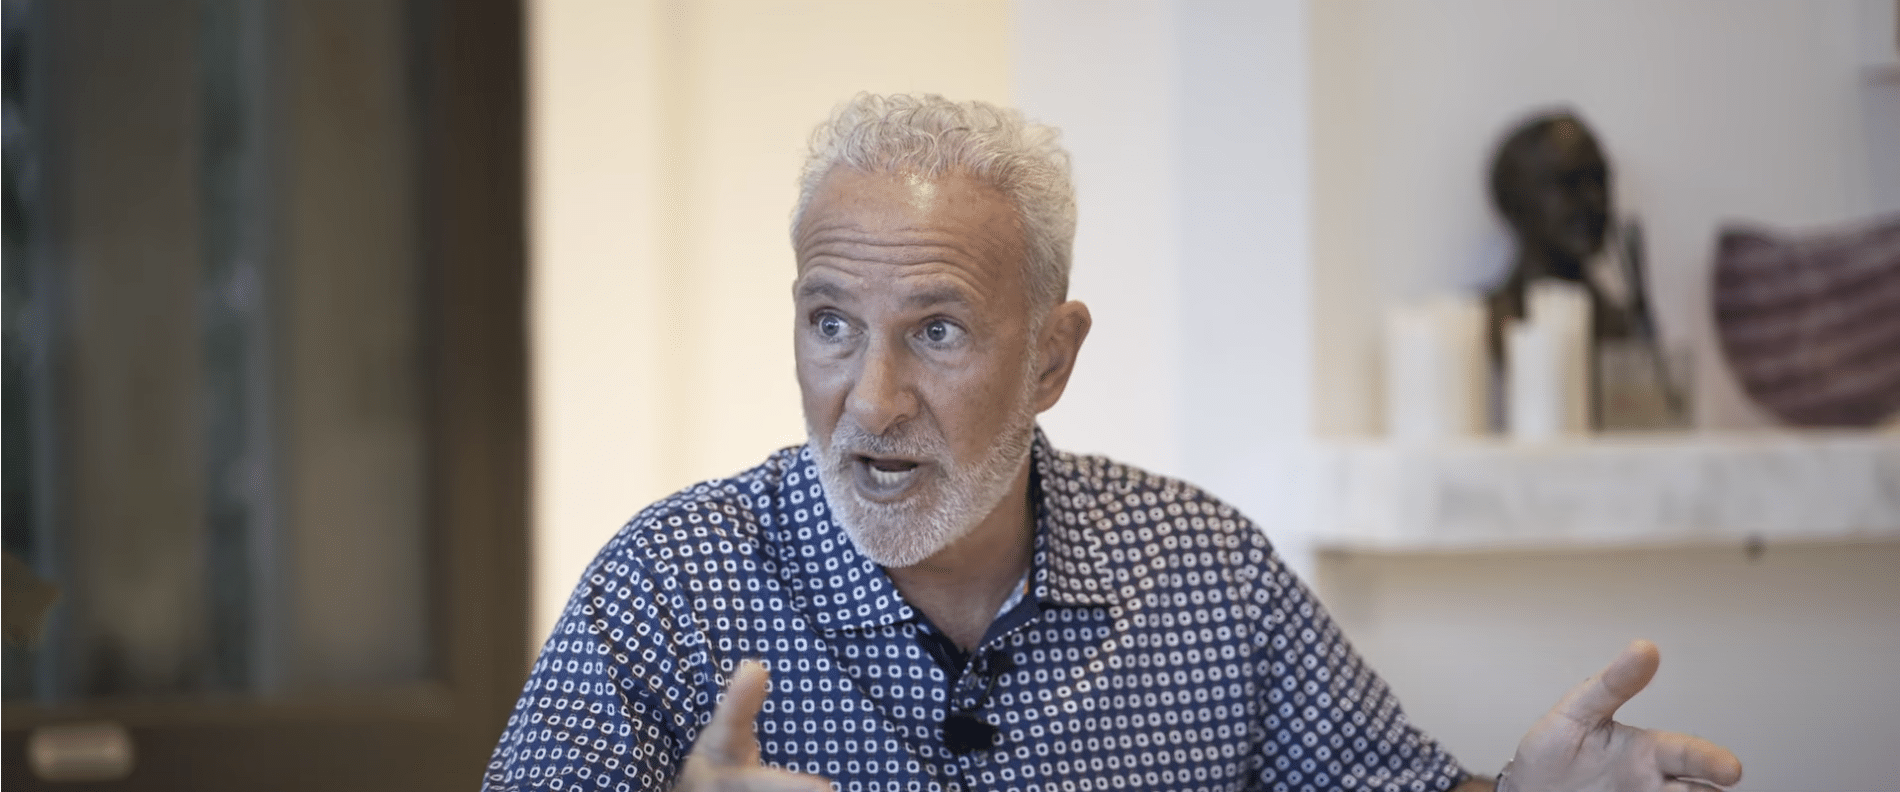 Peter Schiff predicts the world will soon shift from fiat to digital currencies